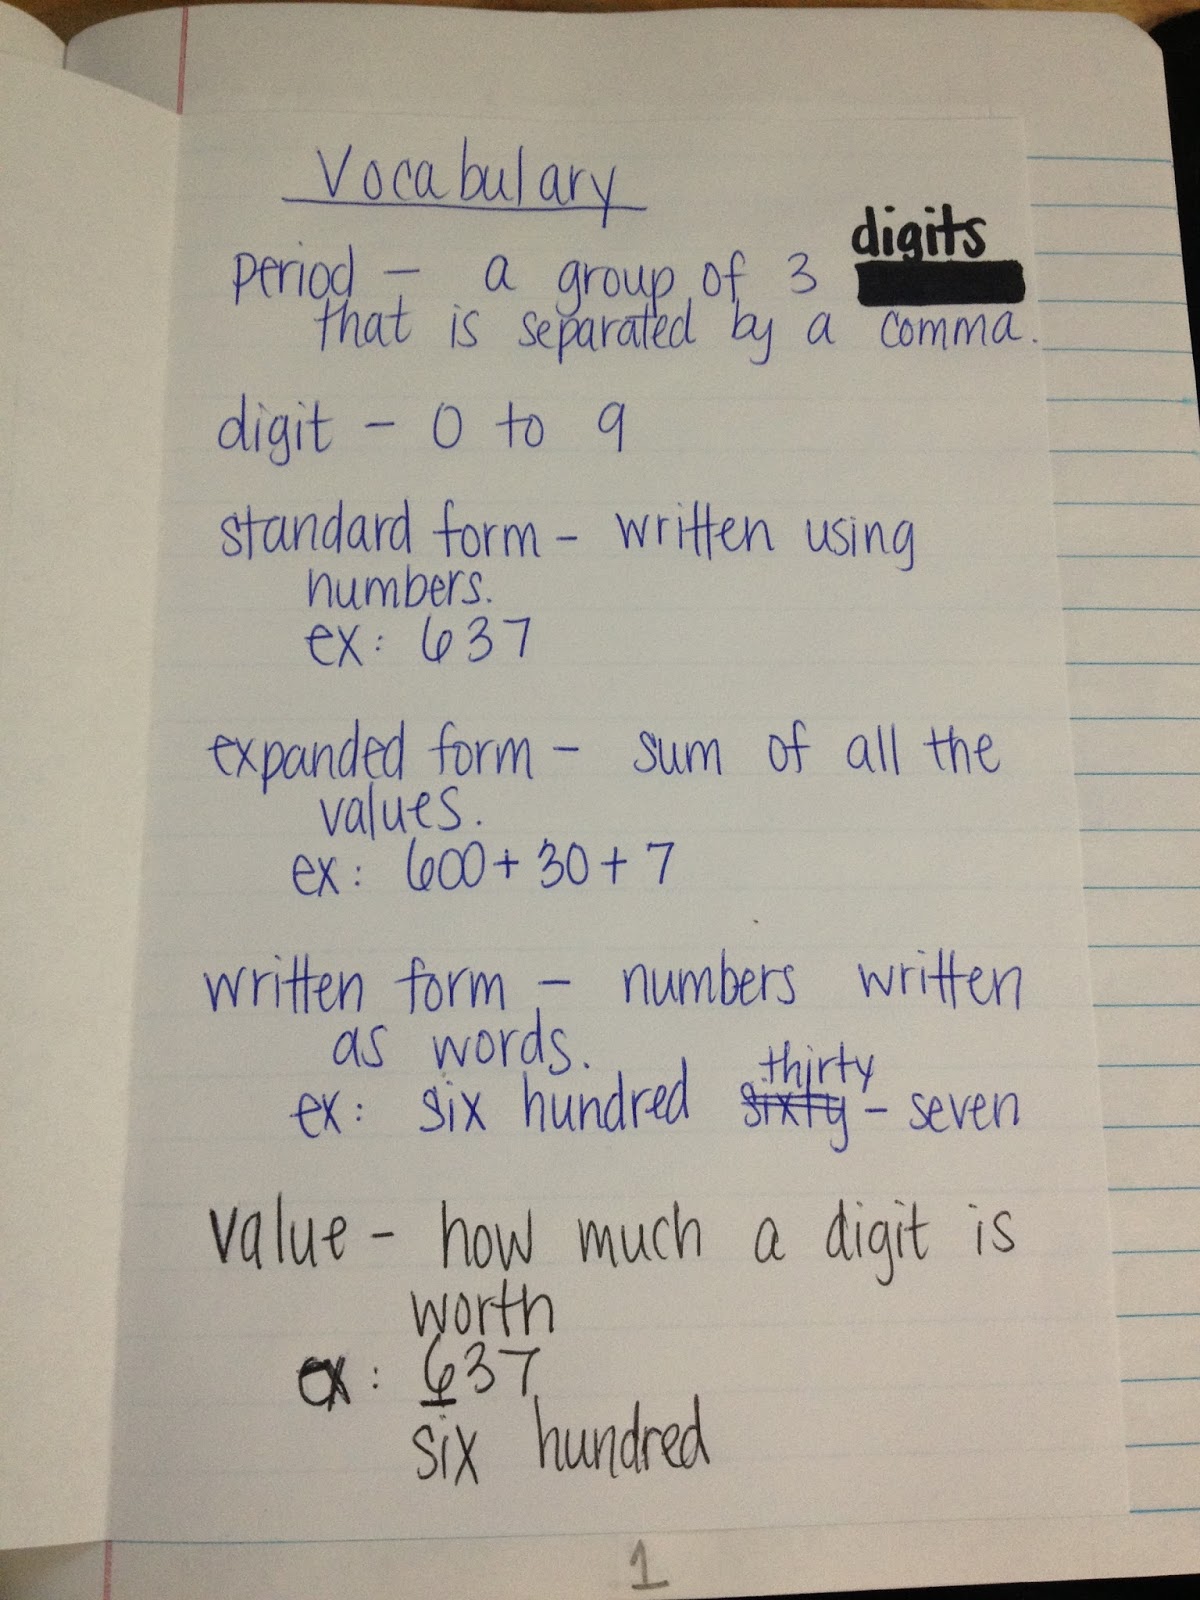 Short Word Form Math Worksheets - 1000 images about my classroom on